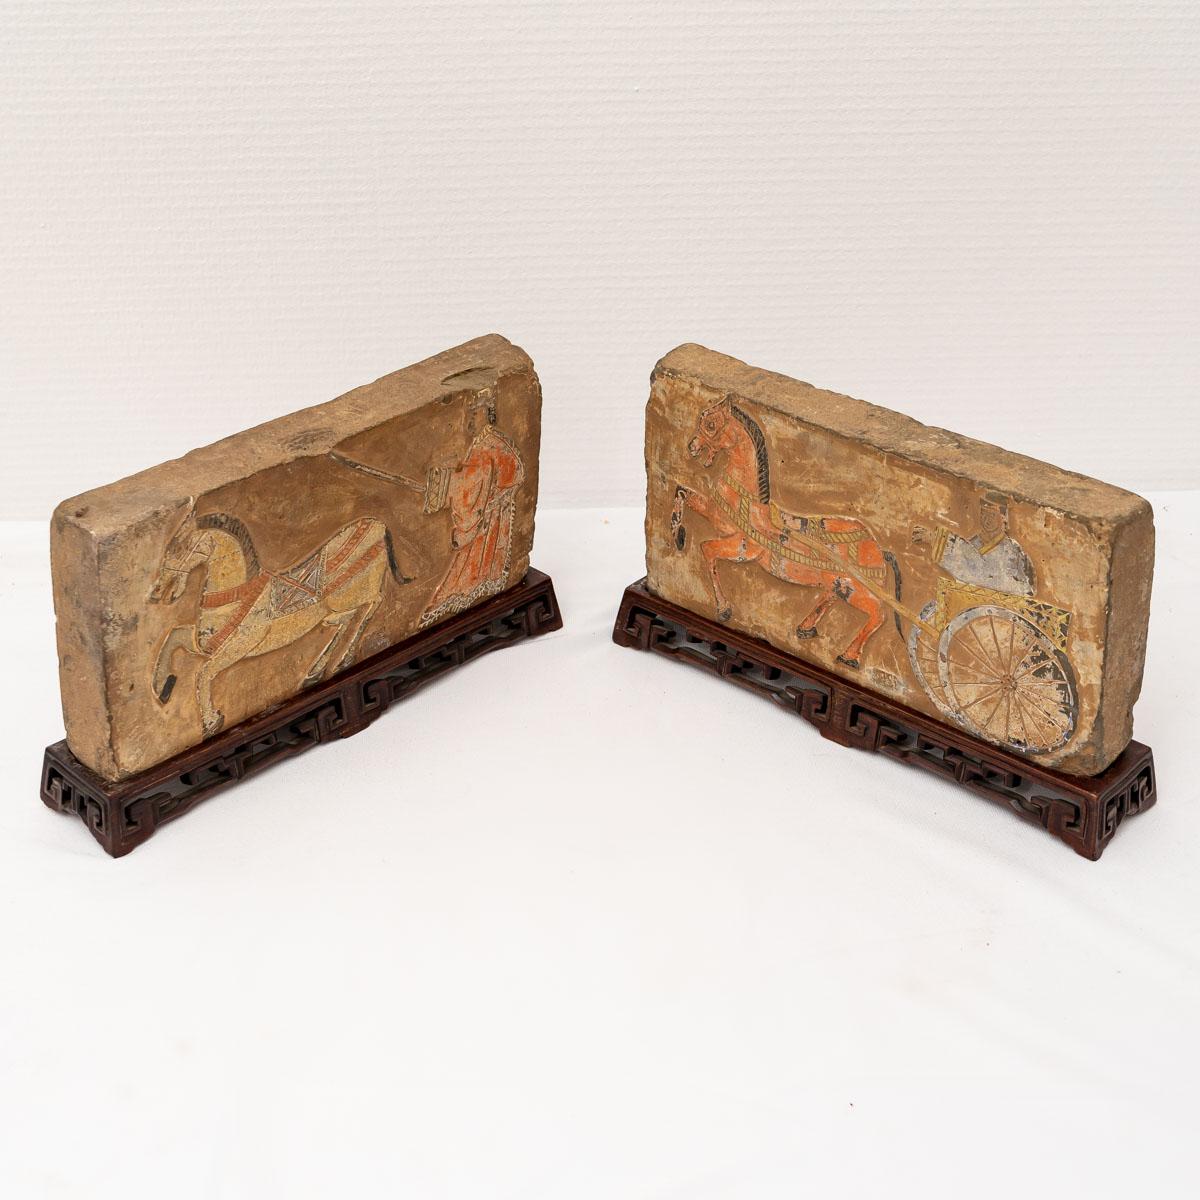 Pair of terracotta bricks with traces of polychromy representing for one a character driving his chariot drawn by a horse and for the other a character training his horse.

These two bricks are exposed on their original carved wooden bases.

Period